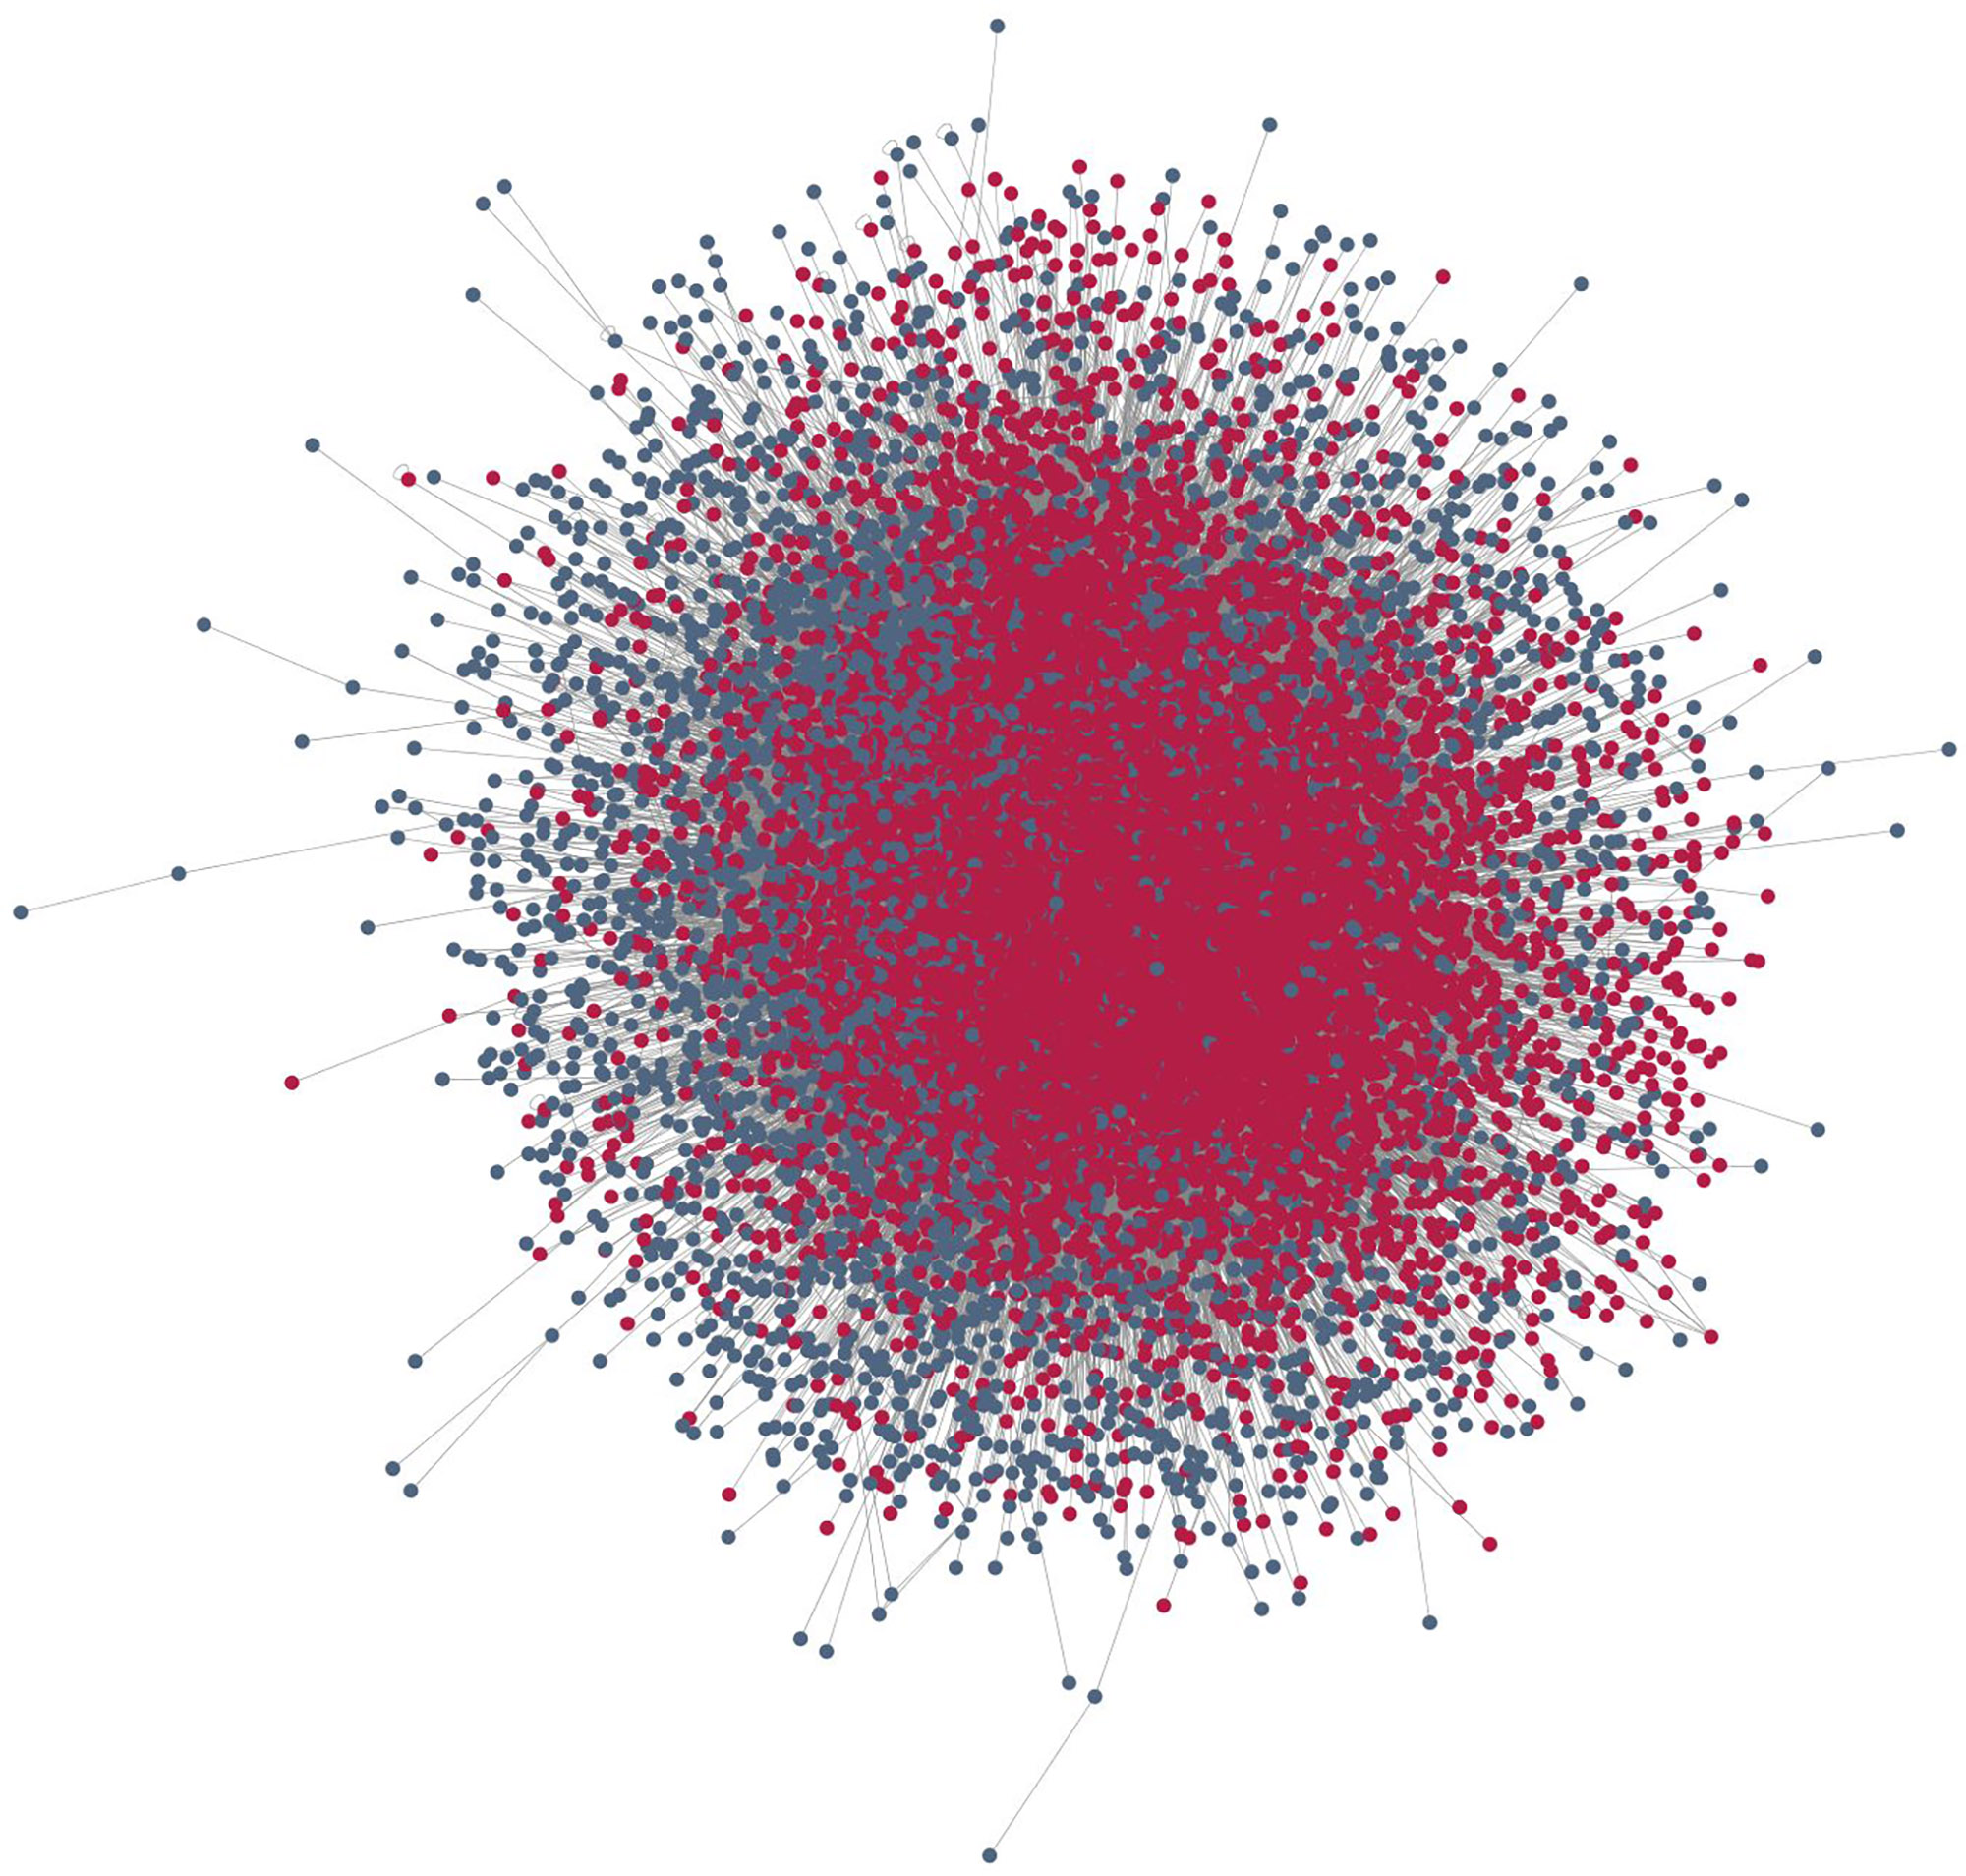  Representation of the human interactome integrated into neXtProt. In red, proteins with knowledge brought by ENYO Pharma.